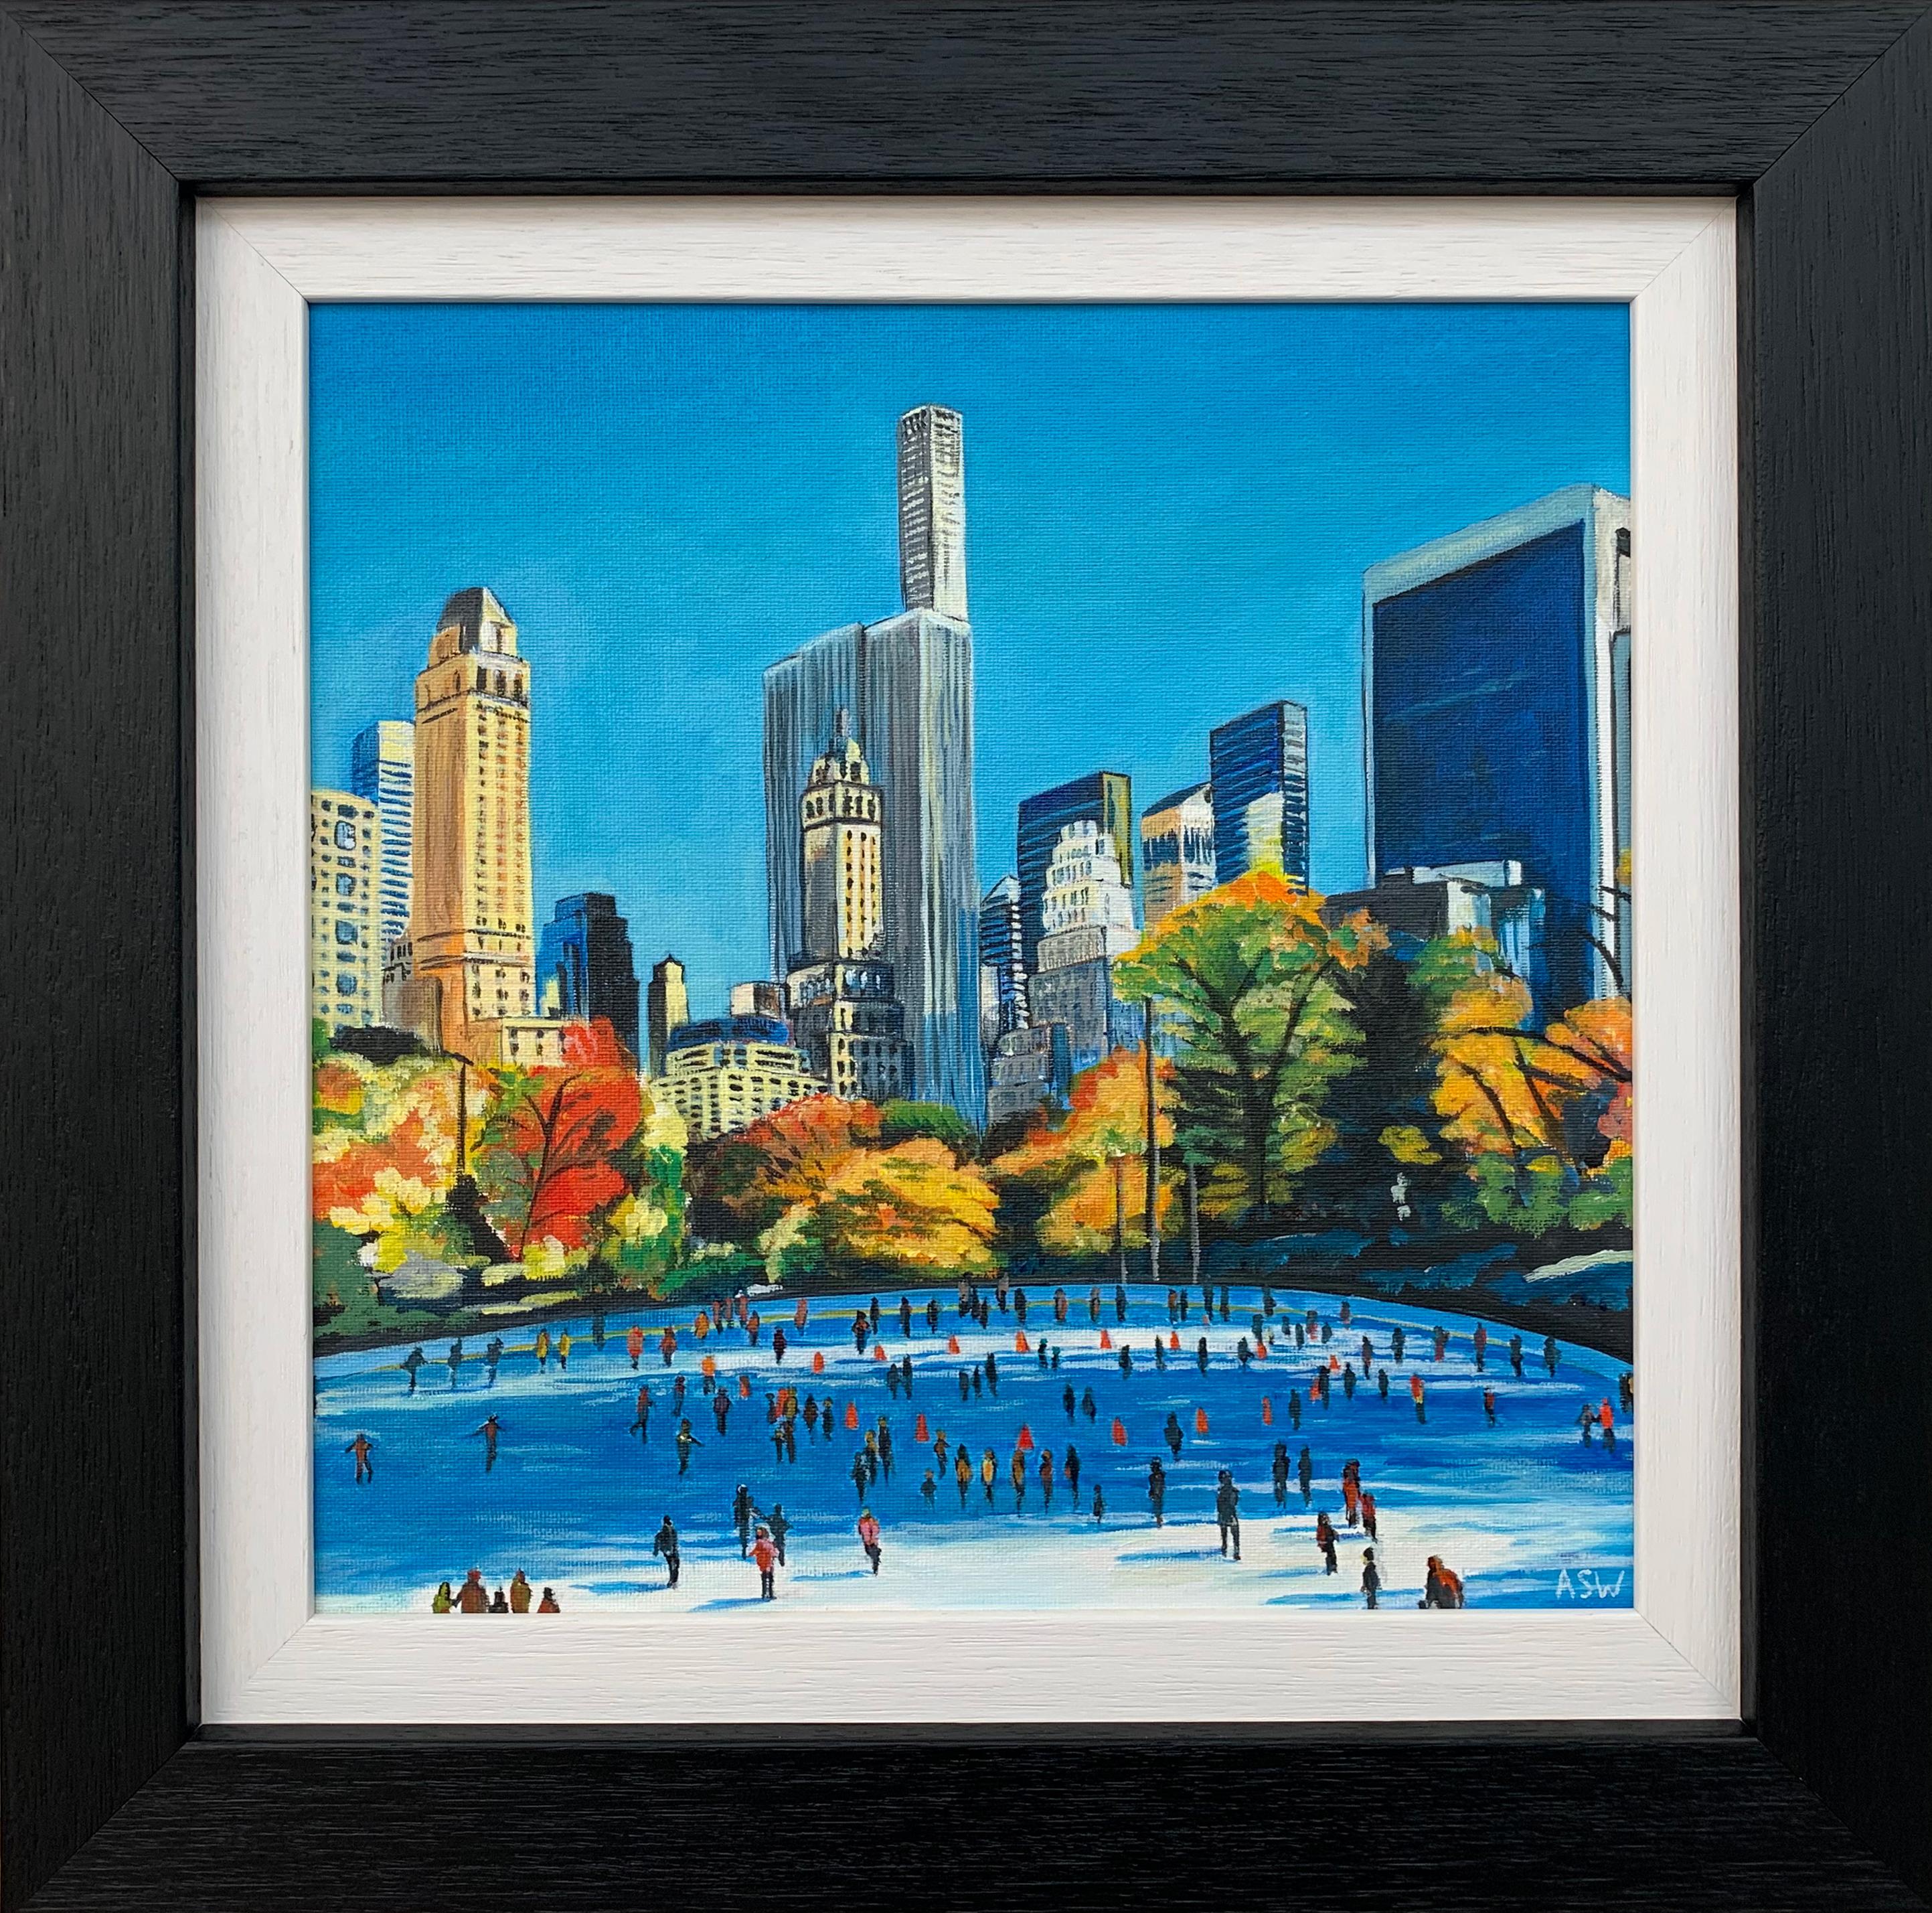 Painting of Skaters in Central Park New York City Autumn Fall by British Artist